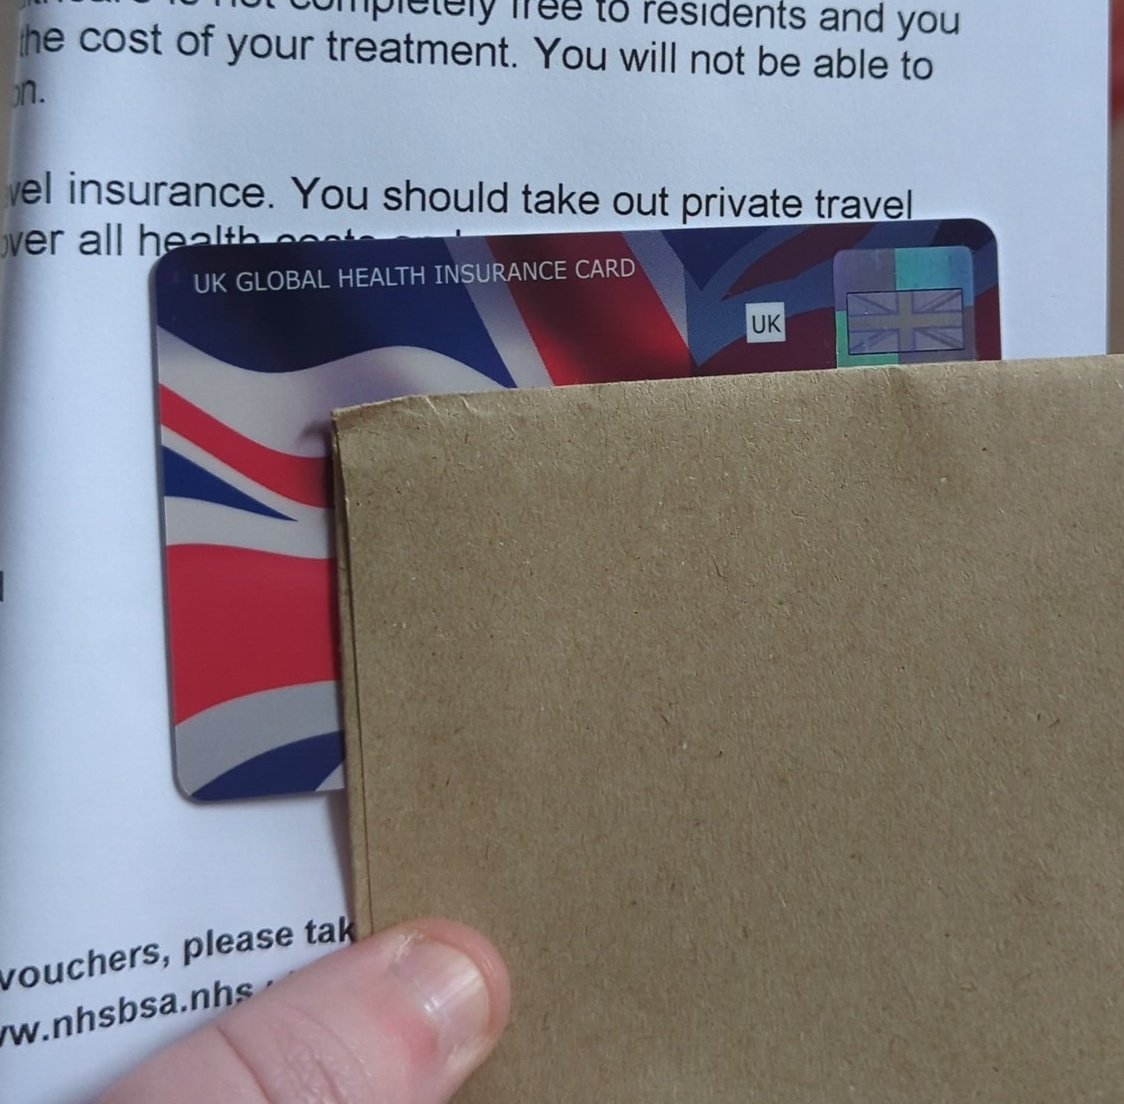 Realised my EHIC had run out so ordered a GHIC to replace it but what in the Brexit is this? 😭 Going to look a right gammon flouncing through Europe with this and the shitty blue passport when I renew that 🙄